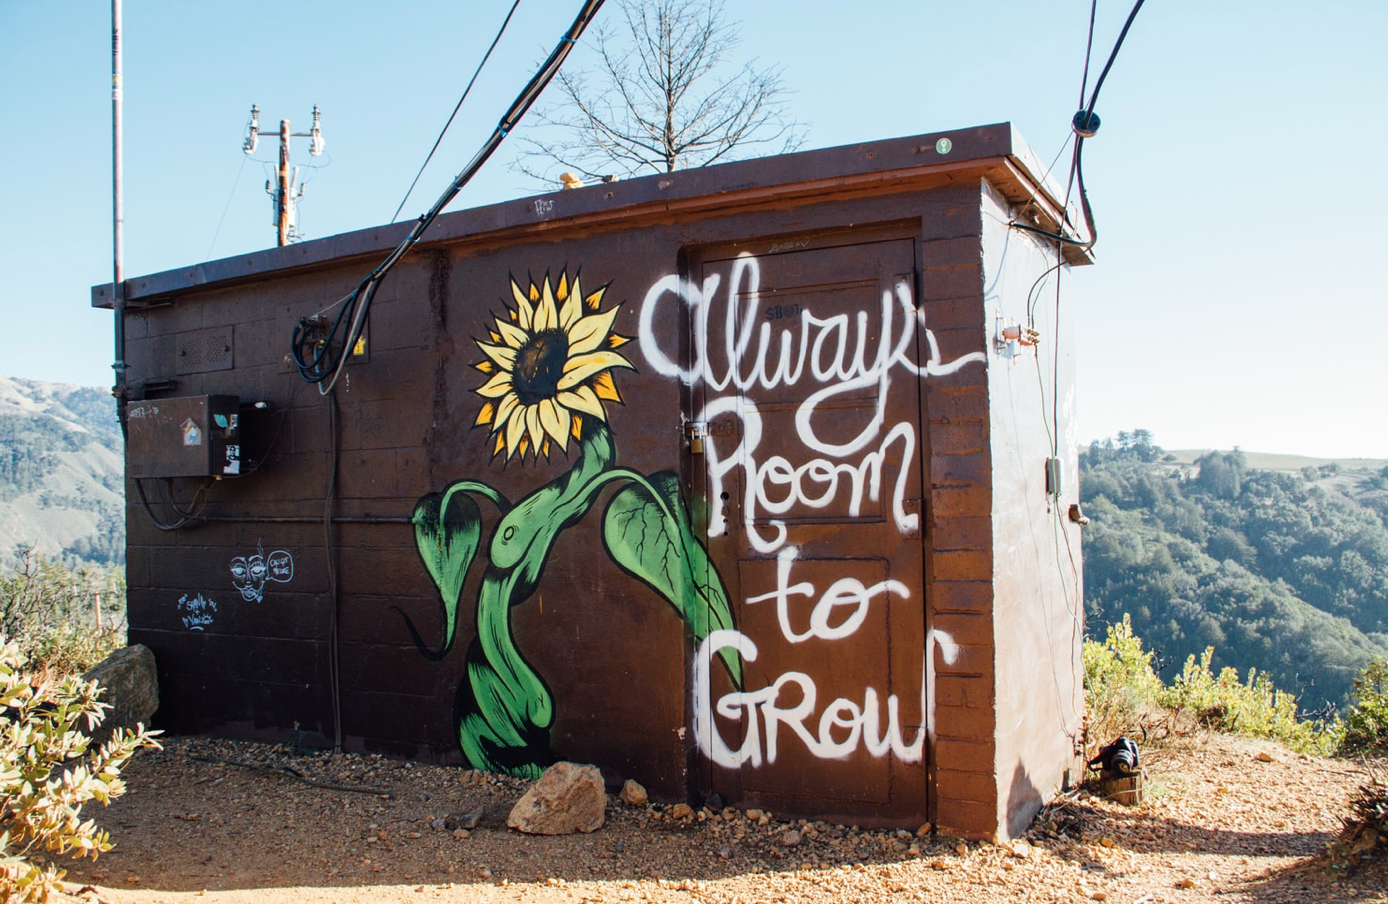 21 lessons - a motivational image of a sunflower with the phrase "Always room to grow"